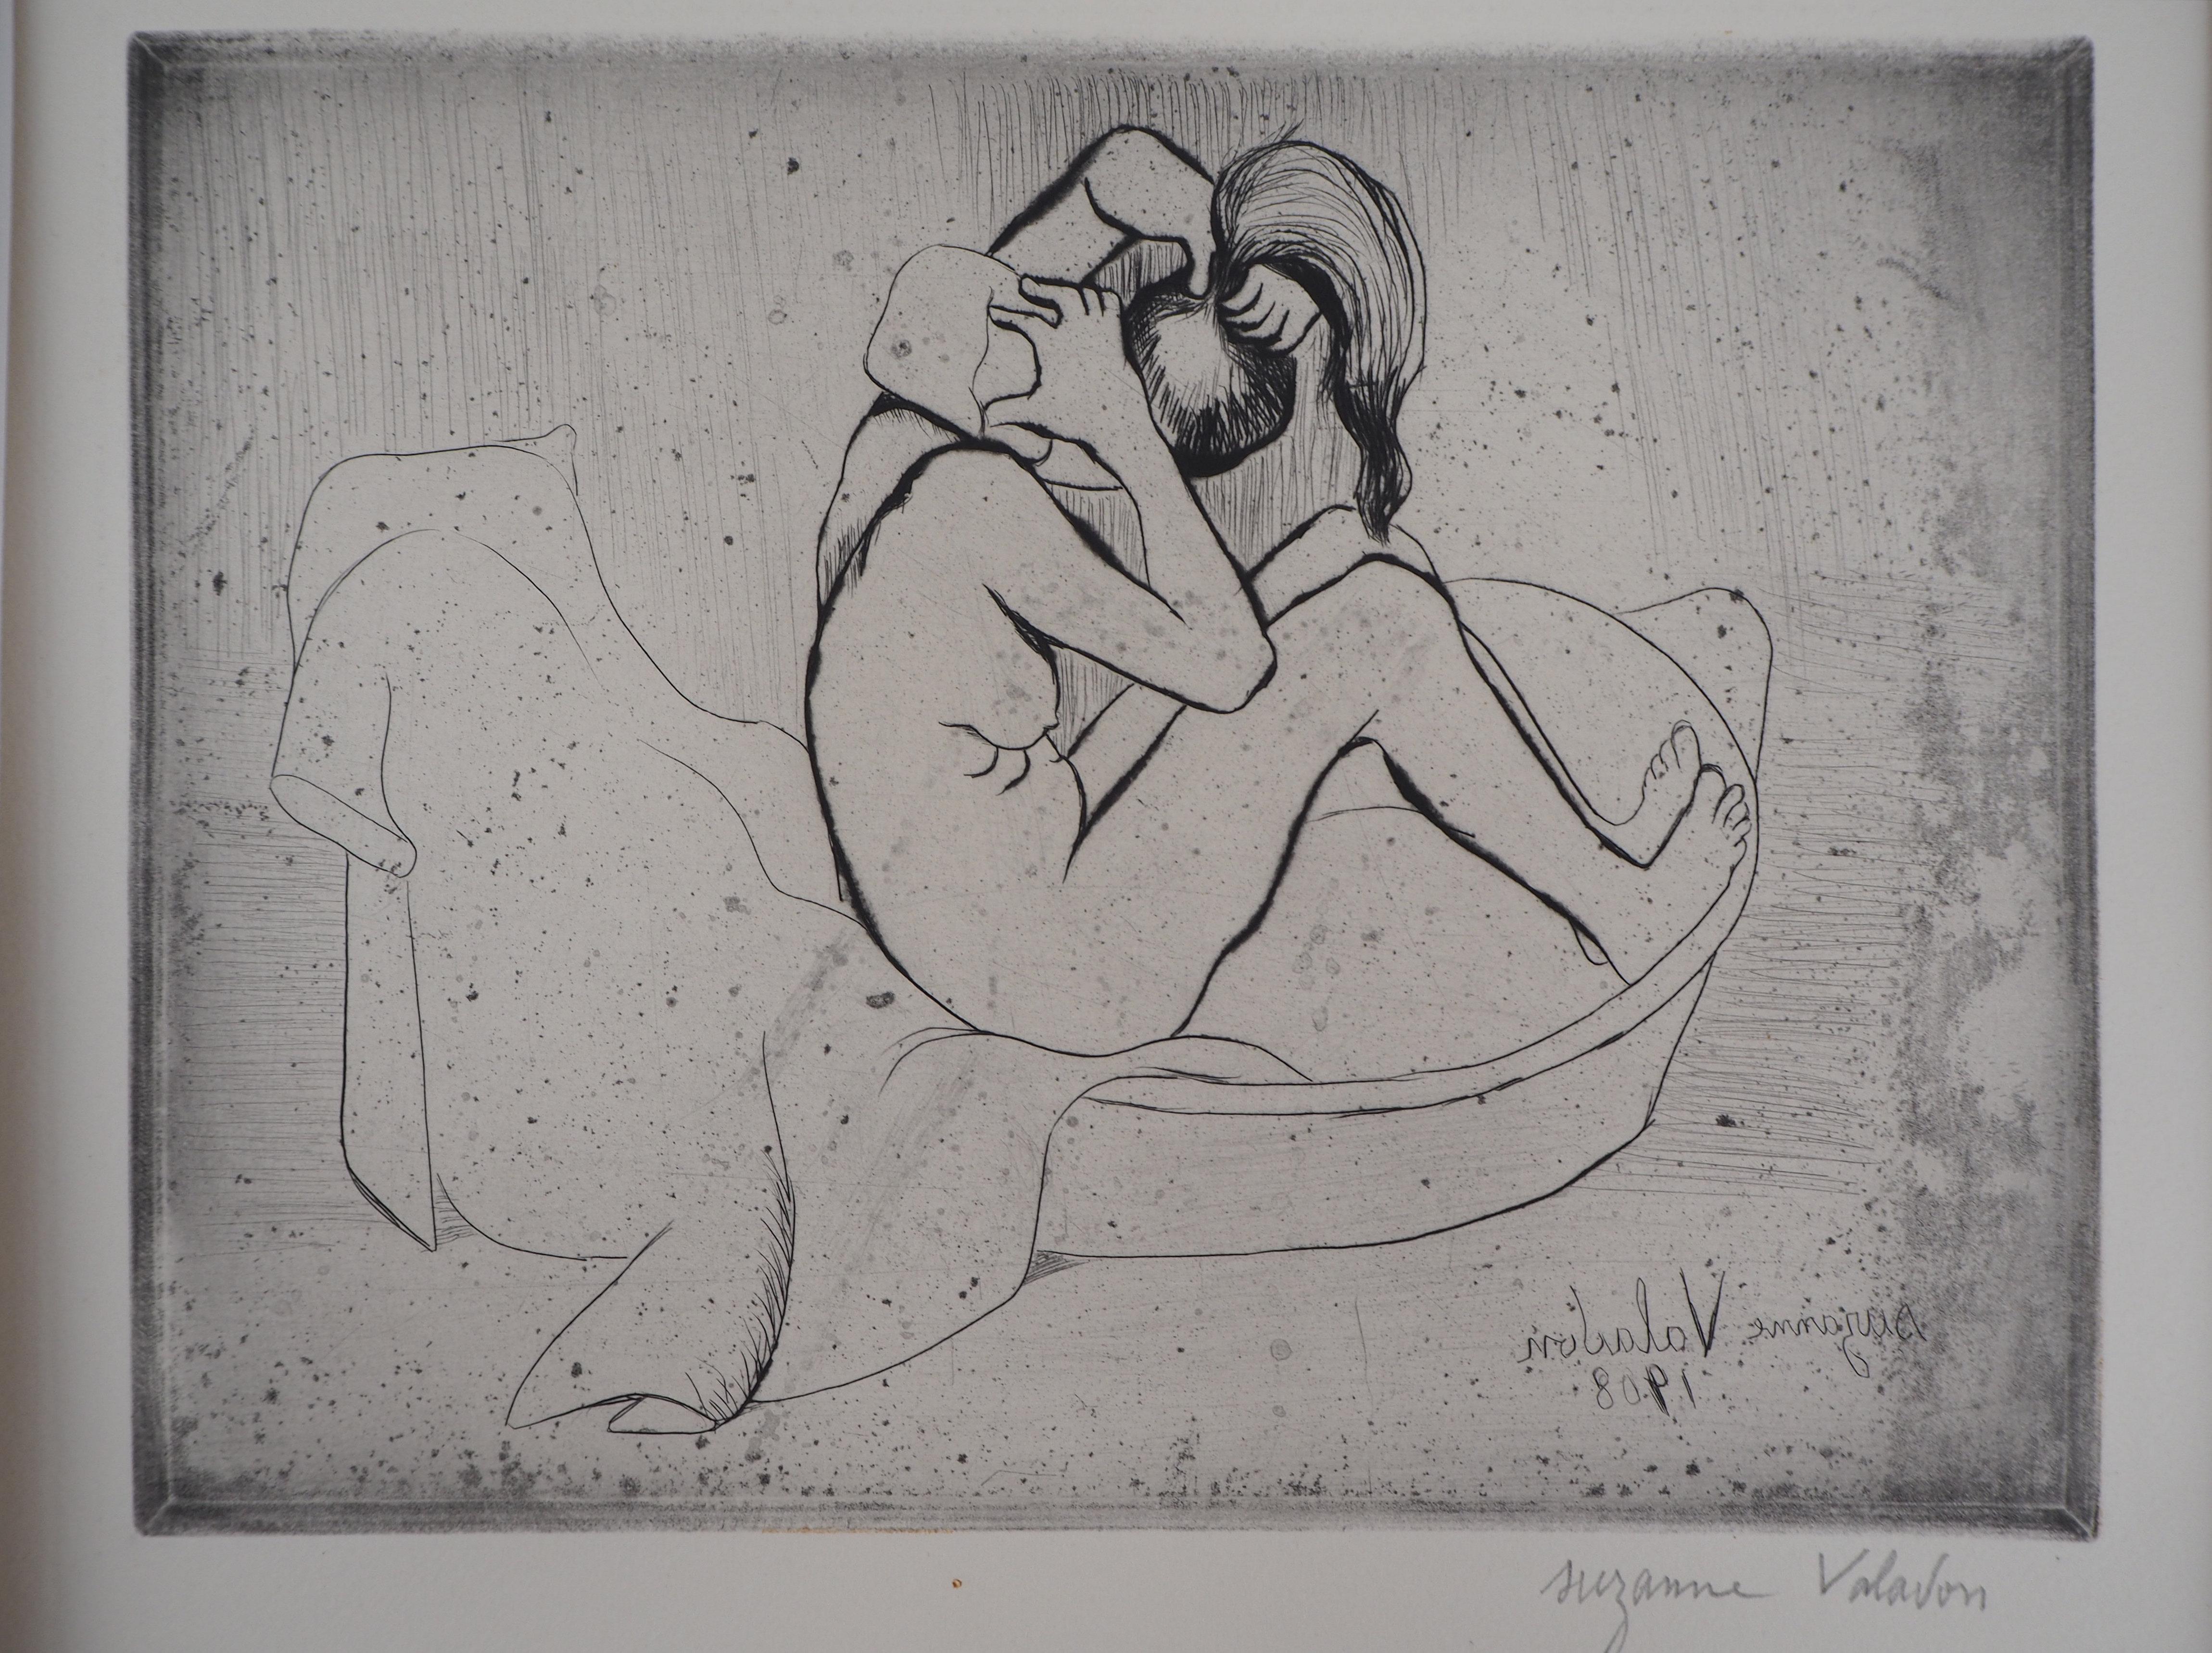 Suzanne Valadon Nude Print - Naked Woman Bathing - Original Etching Handsigned 